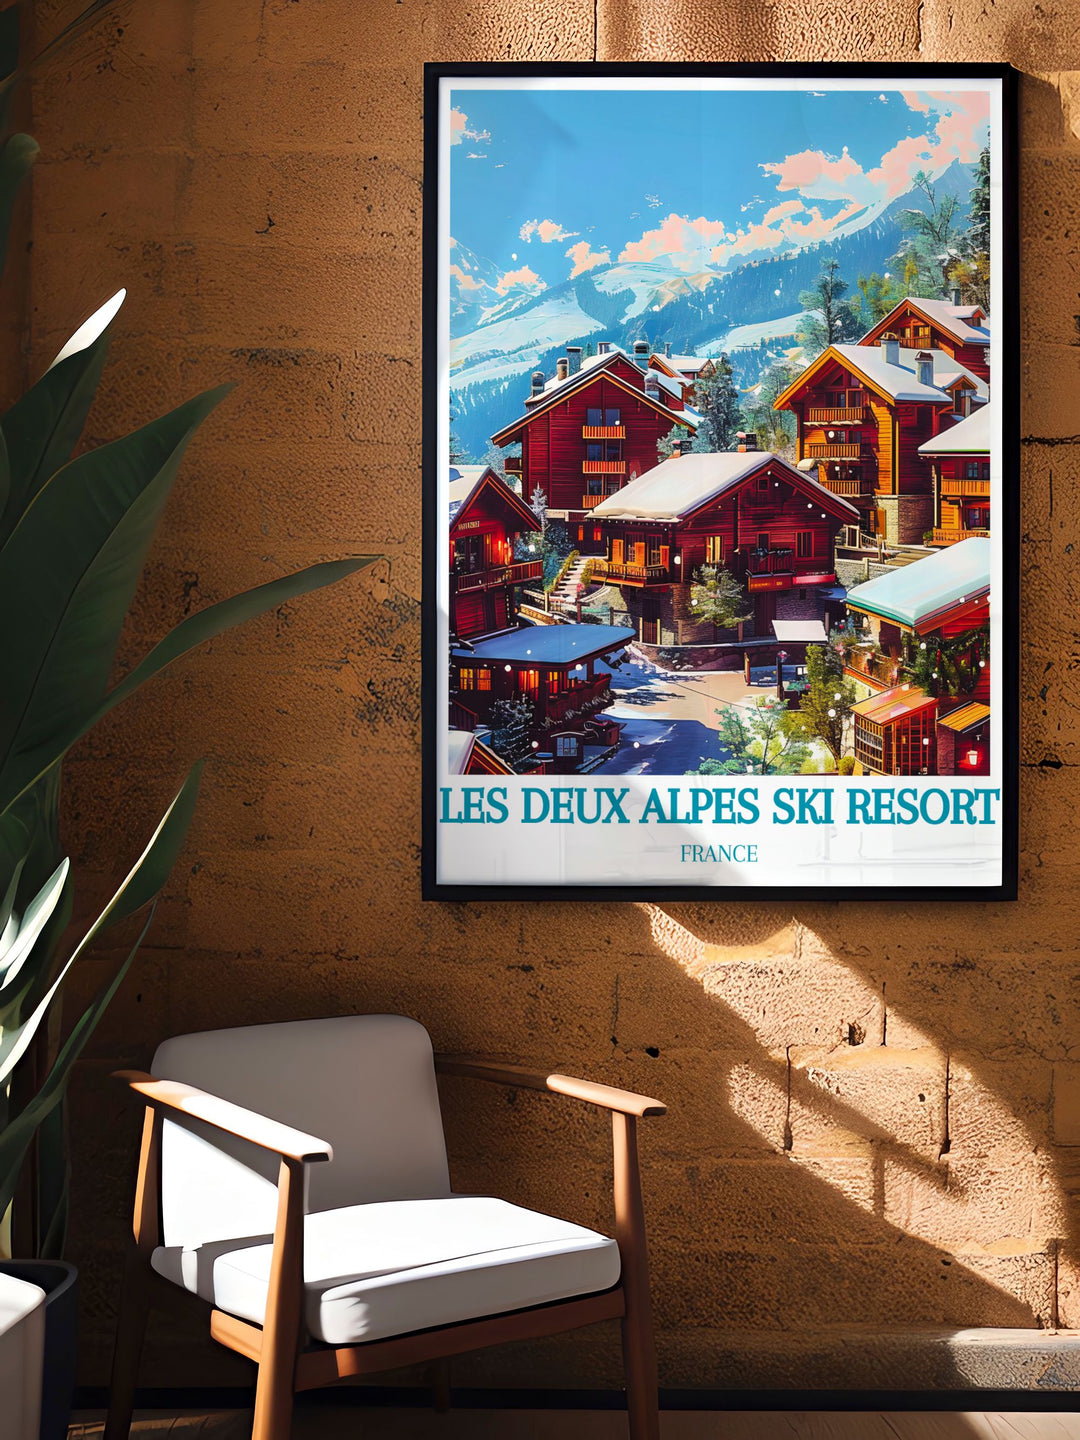 Featuring the expansive ski slopes of Les Deux Alpes, this poster showcases the vibrant village and surrounding alpine beauty, perfect for those who cherish skiing and mountain adventures.